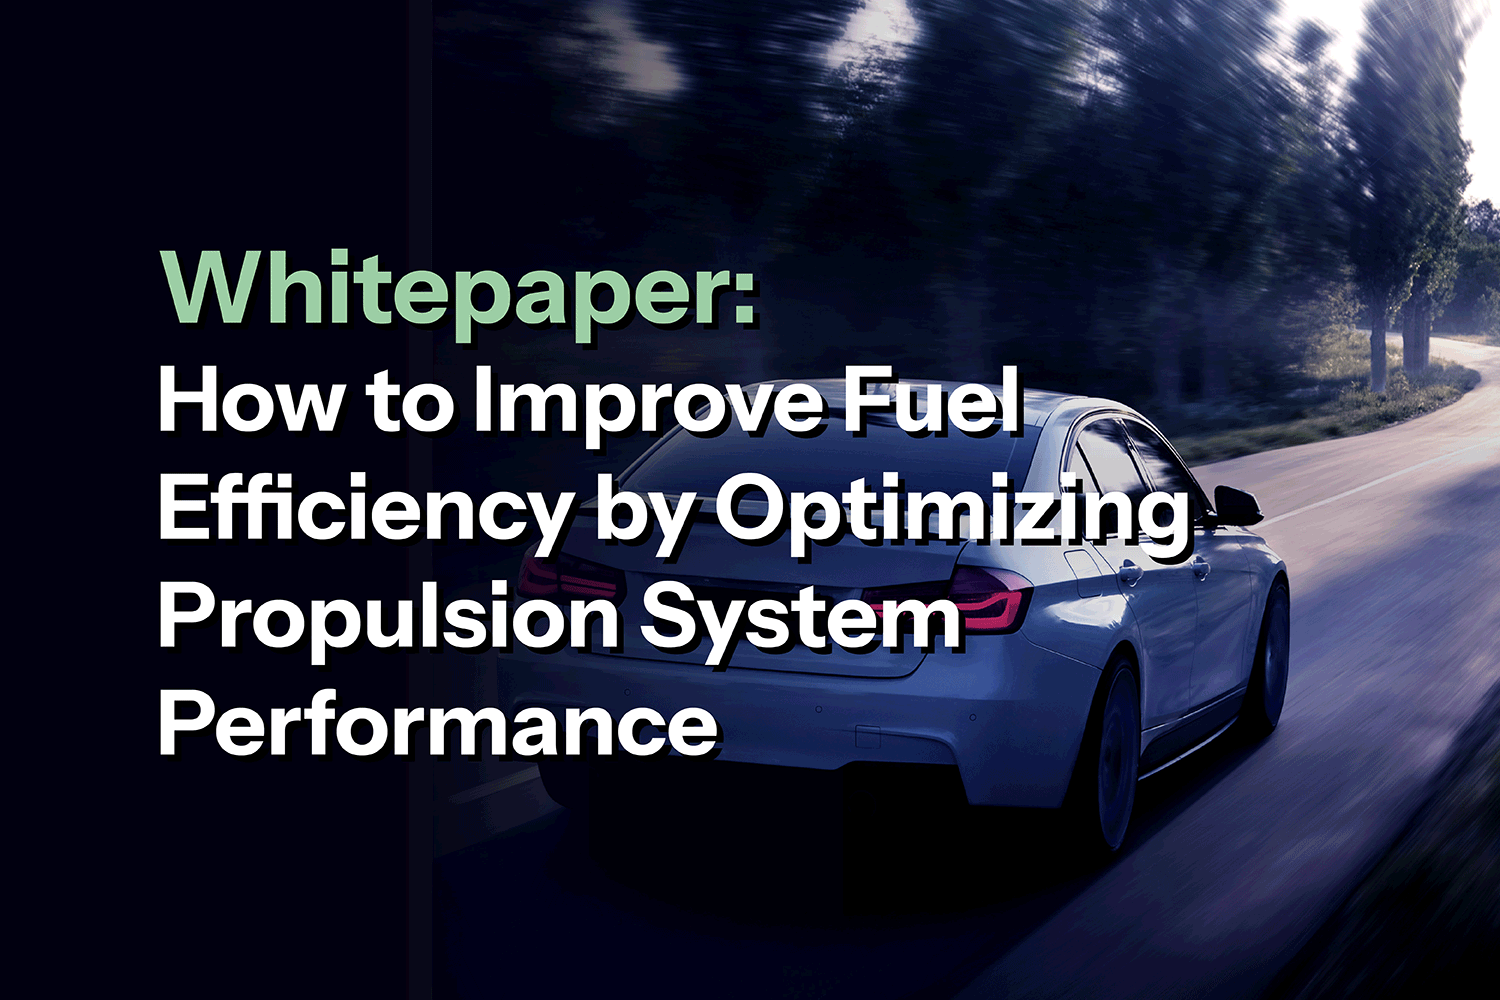 LSS-Knowledge-Center-Whitepaper-How-to-Improve-Fuel-Efficiency(...)-Card-Image-01